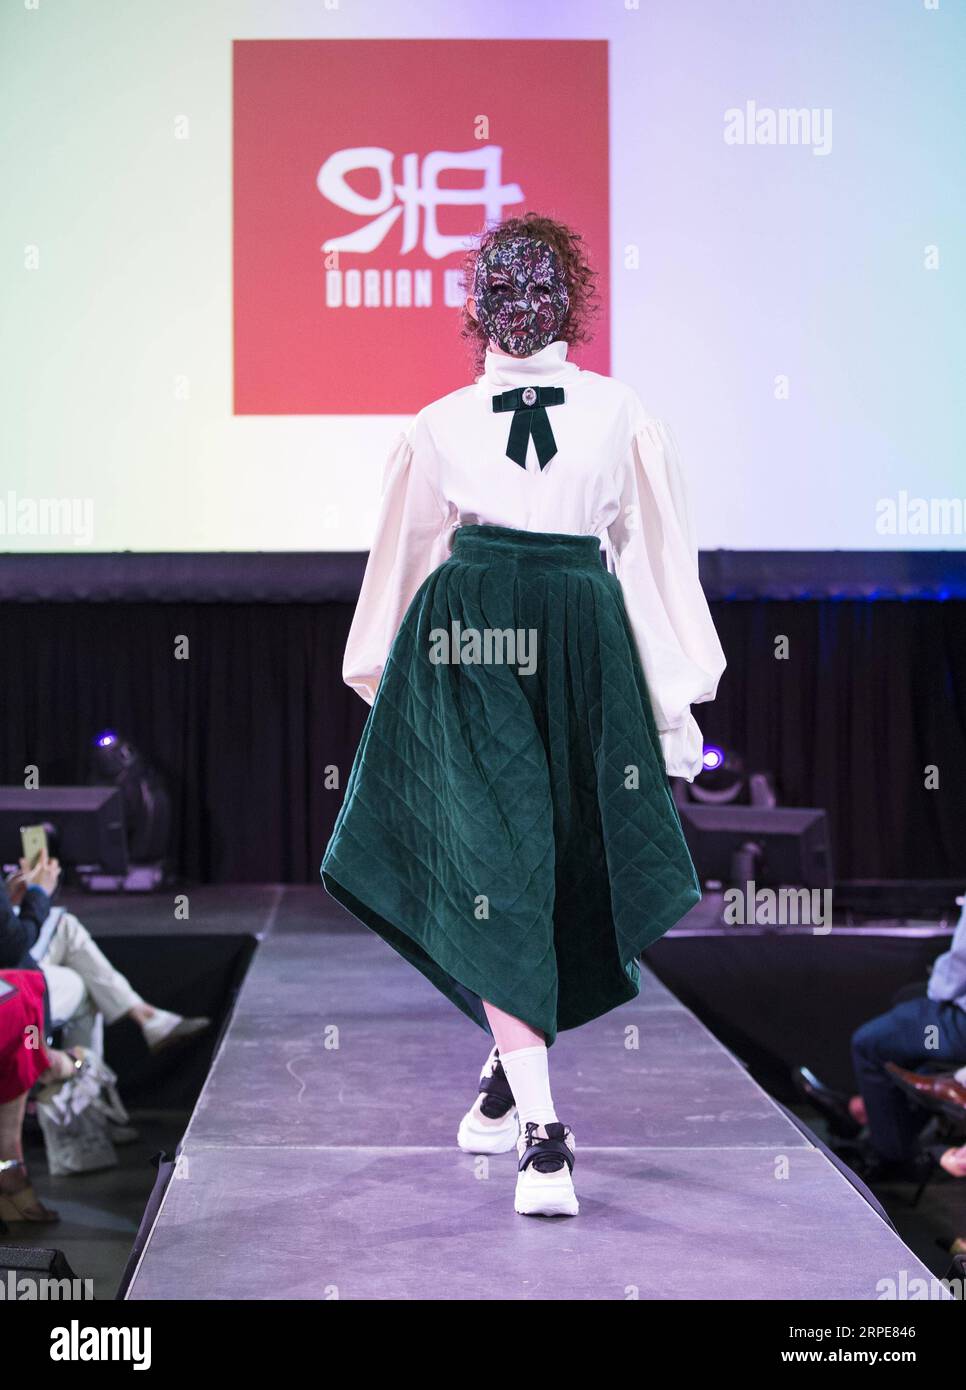 (190820) -- TORONTO, Aug. 20, 2019 -- A model presents a creation during the fashion show of the 2019 Apparel Textile Sourcing Canada trade show in Toronto, Canada, on Aug. 20, 2019. The fashion show displayed the latest designs from dozens of fashion brands around the world on Tuesday. (Photo by /Xinhua) CANADA-TORONTO-APPAREL TEXTILE SOURCING TRADE SHOW-FASHION ZouxZheng PUBLICATIONxNOTxINxCHN Stock Photo